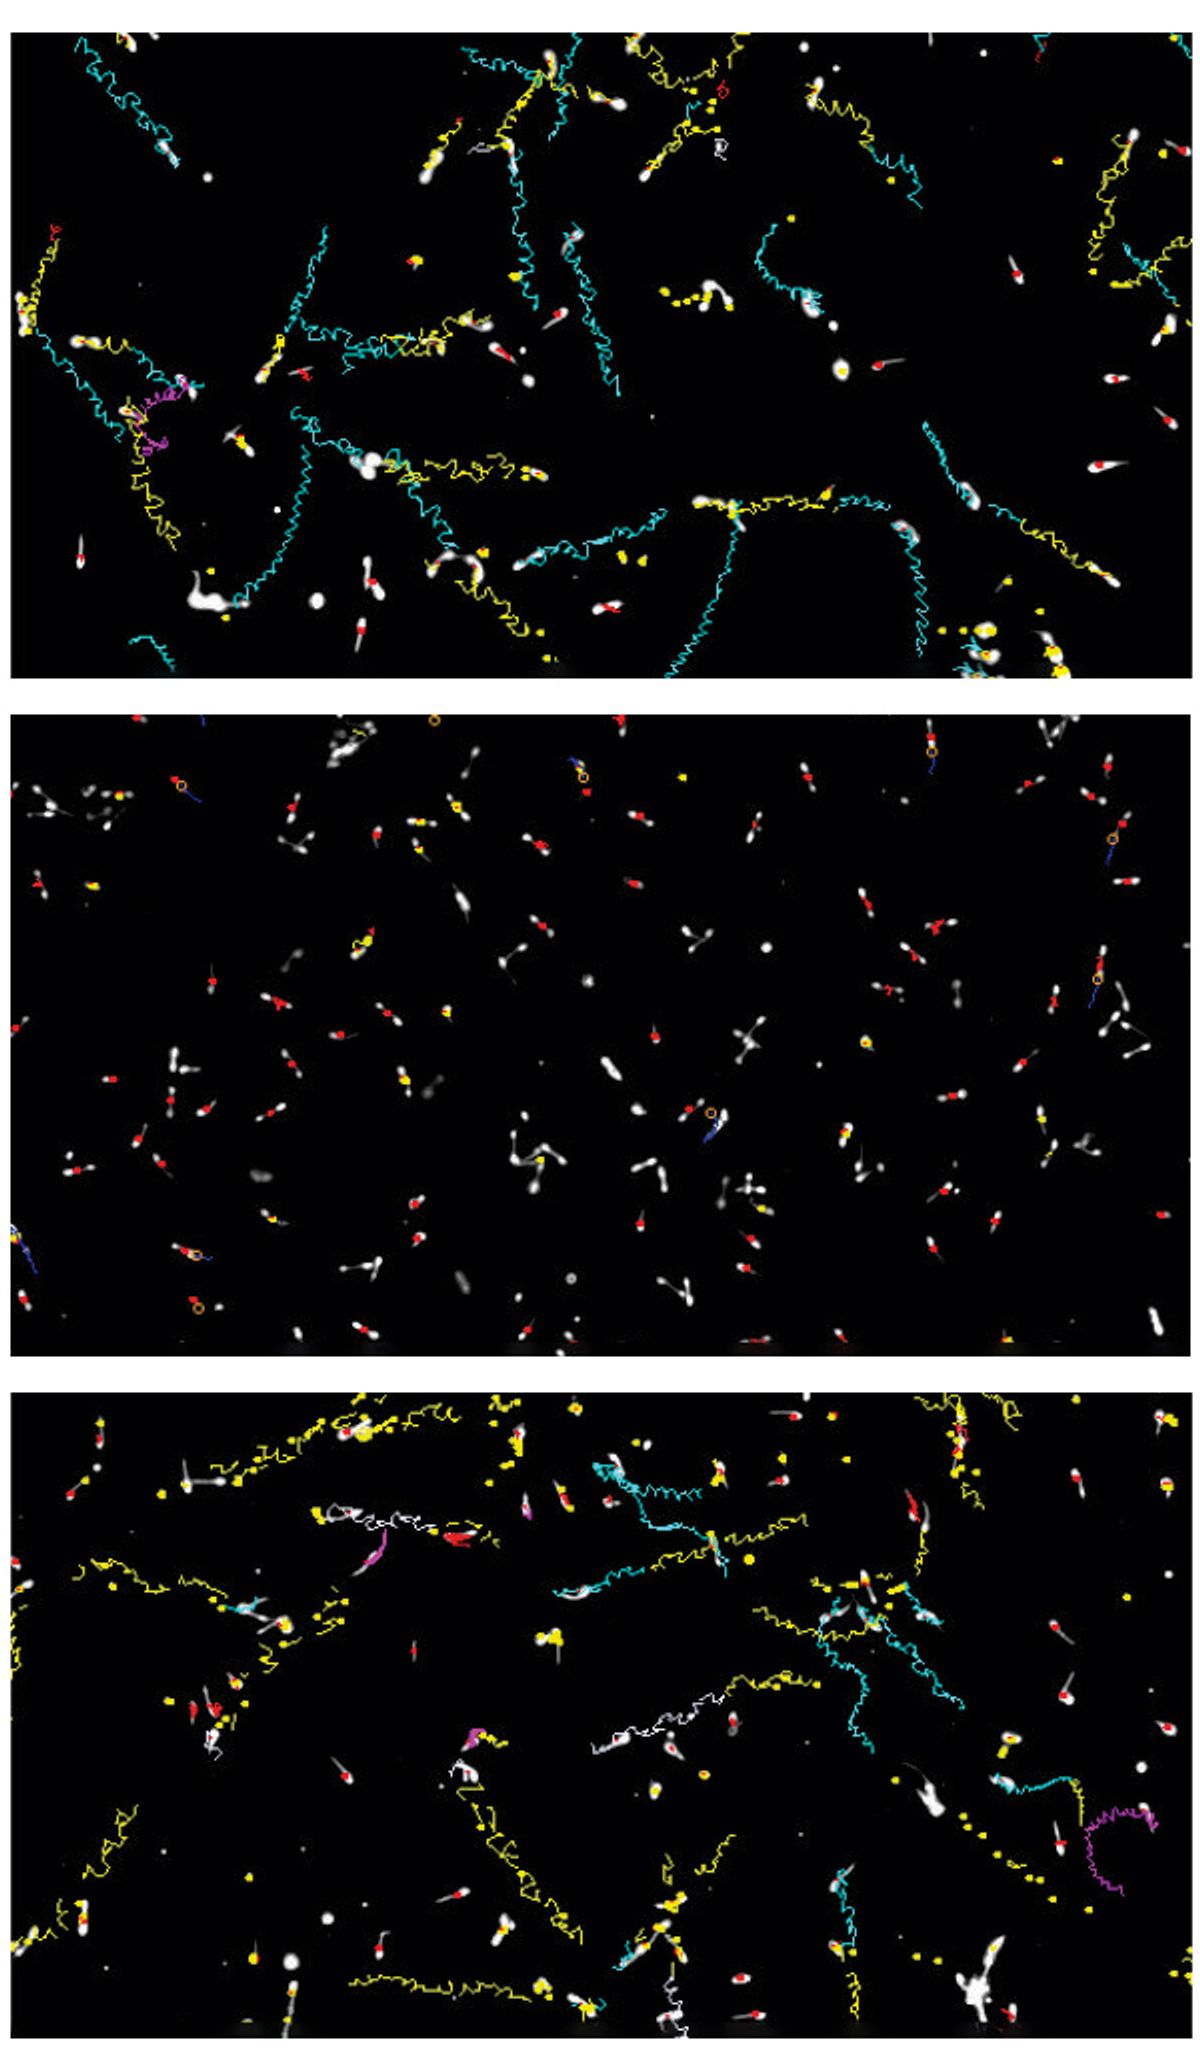 Three separate pictures showing sperm motility tracks before treatment with the inhibitor (top), one hour after exposure to the inhibitor (middle) and 24 hours after exposure (bottom). The top and bottom images look almost identical, with long squiggly lines emanating from each sperm. The middle image, in contrast, has no squiggly lines, showing the sperm's inability to move.